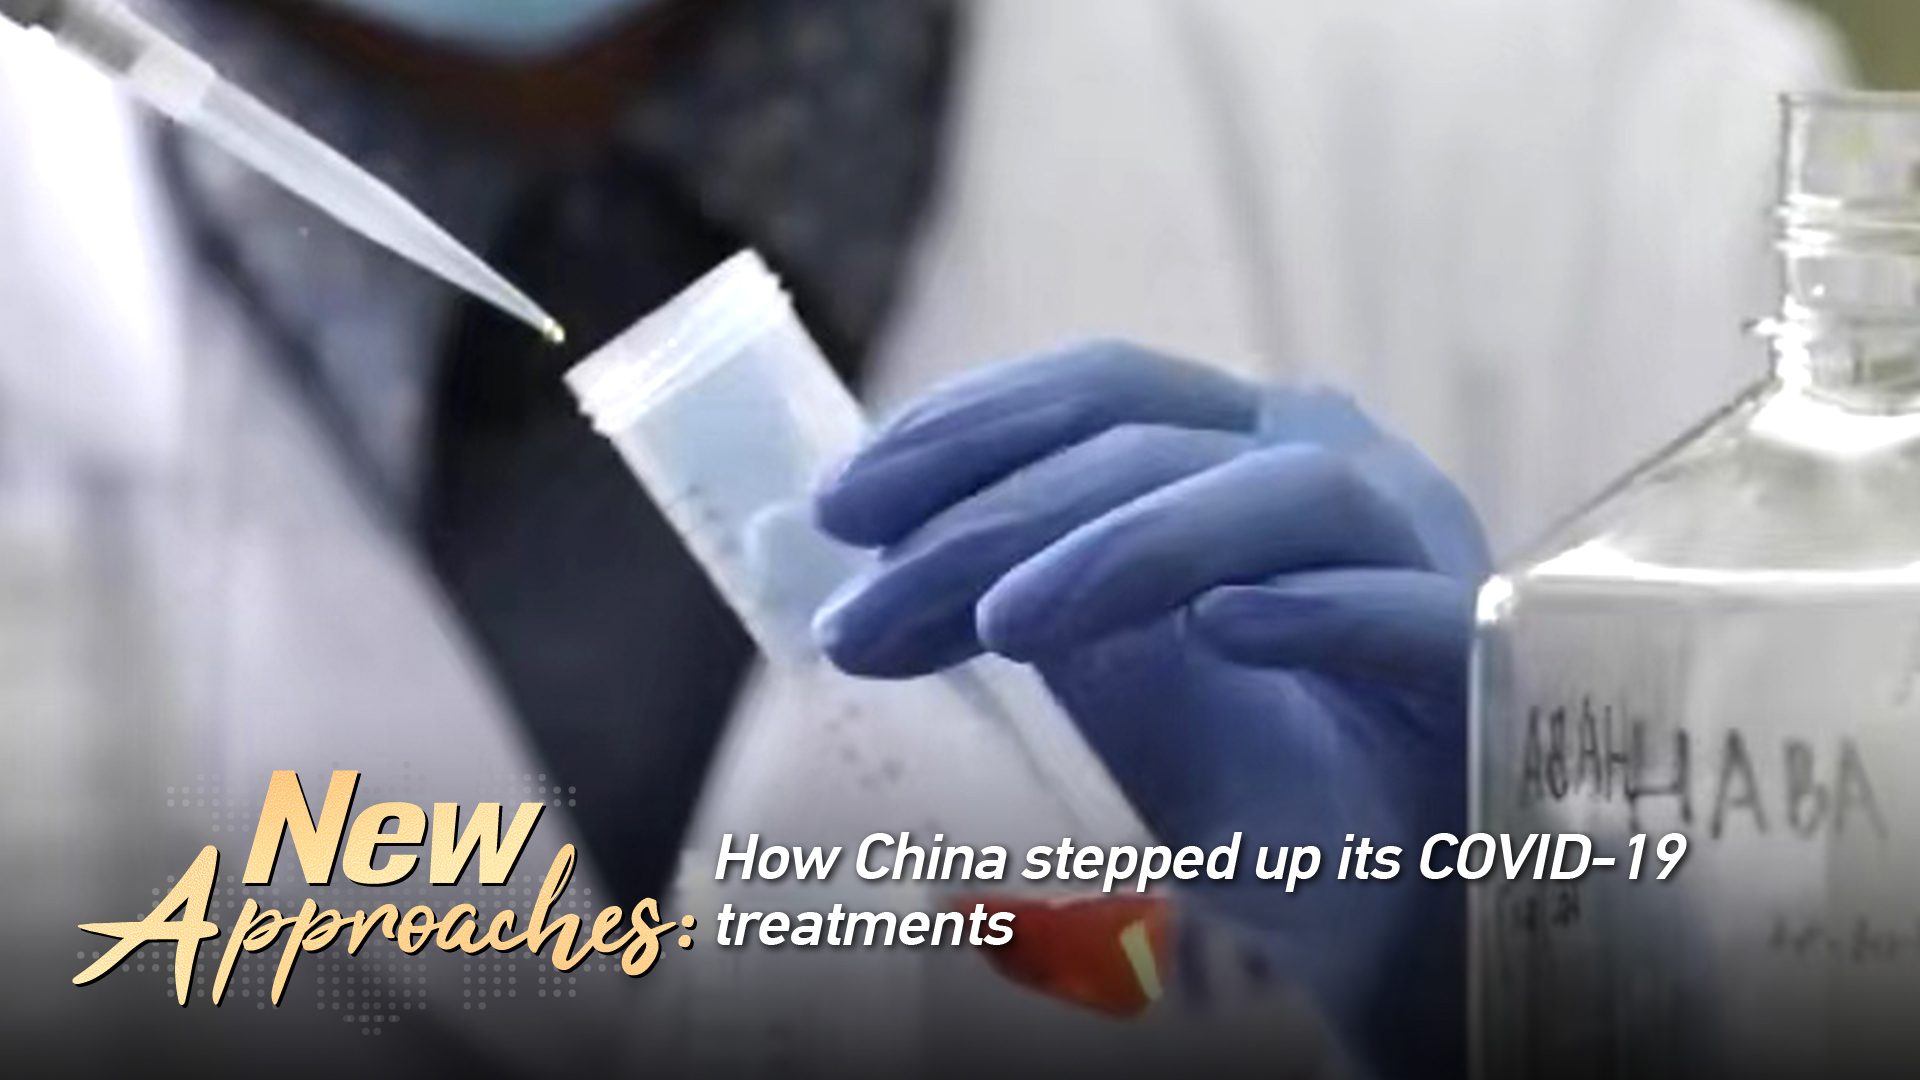 New Approaches: How China steps up its COVID-19 treatments